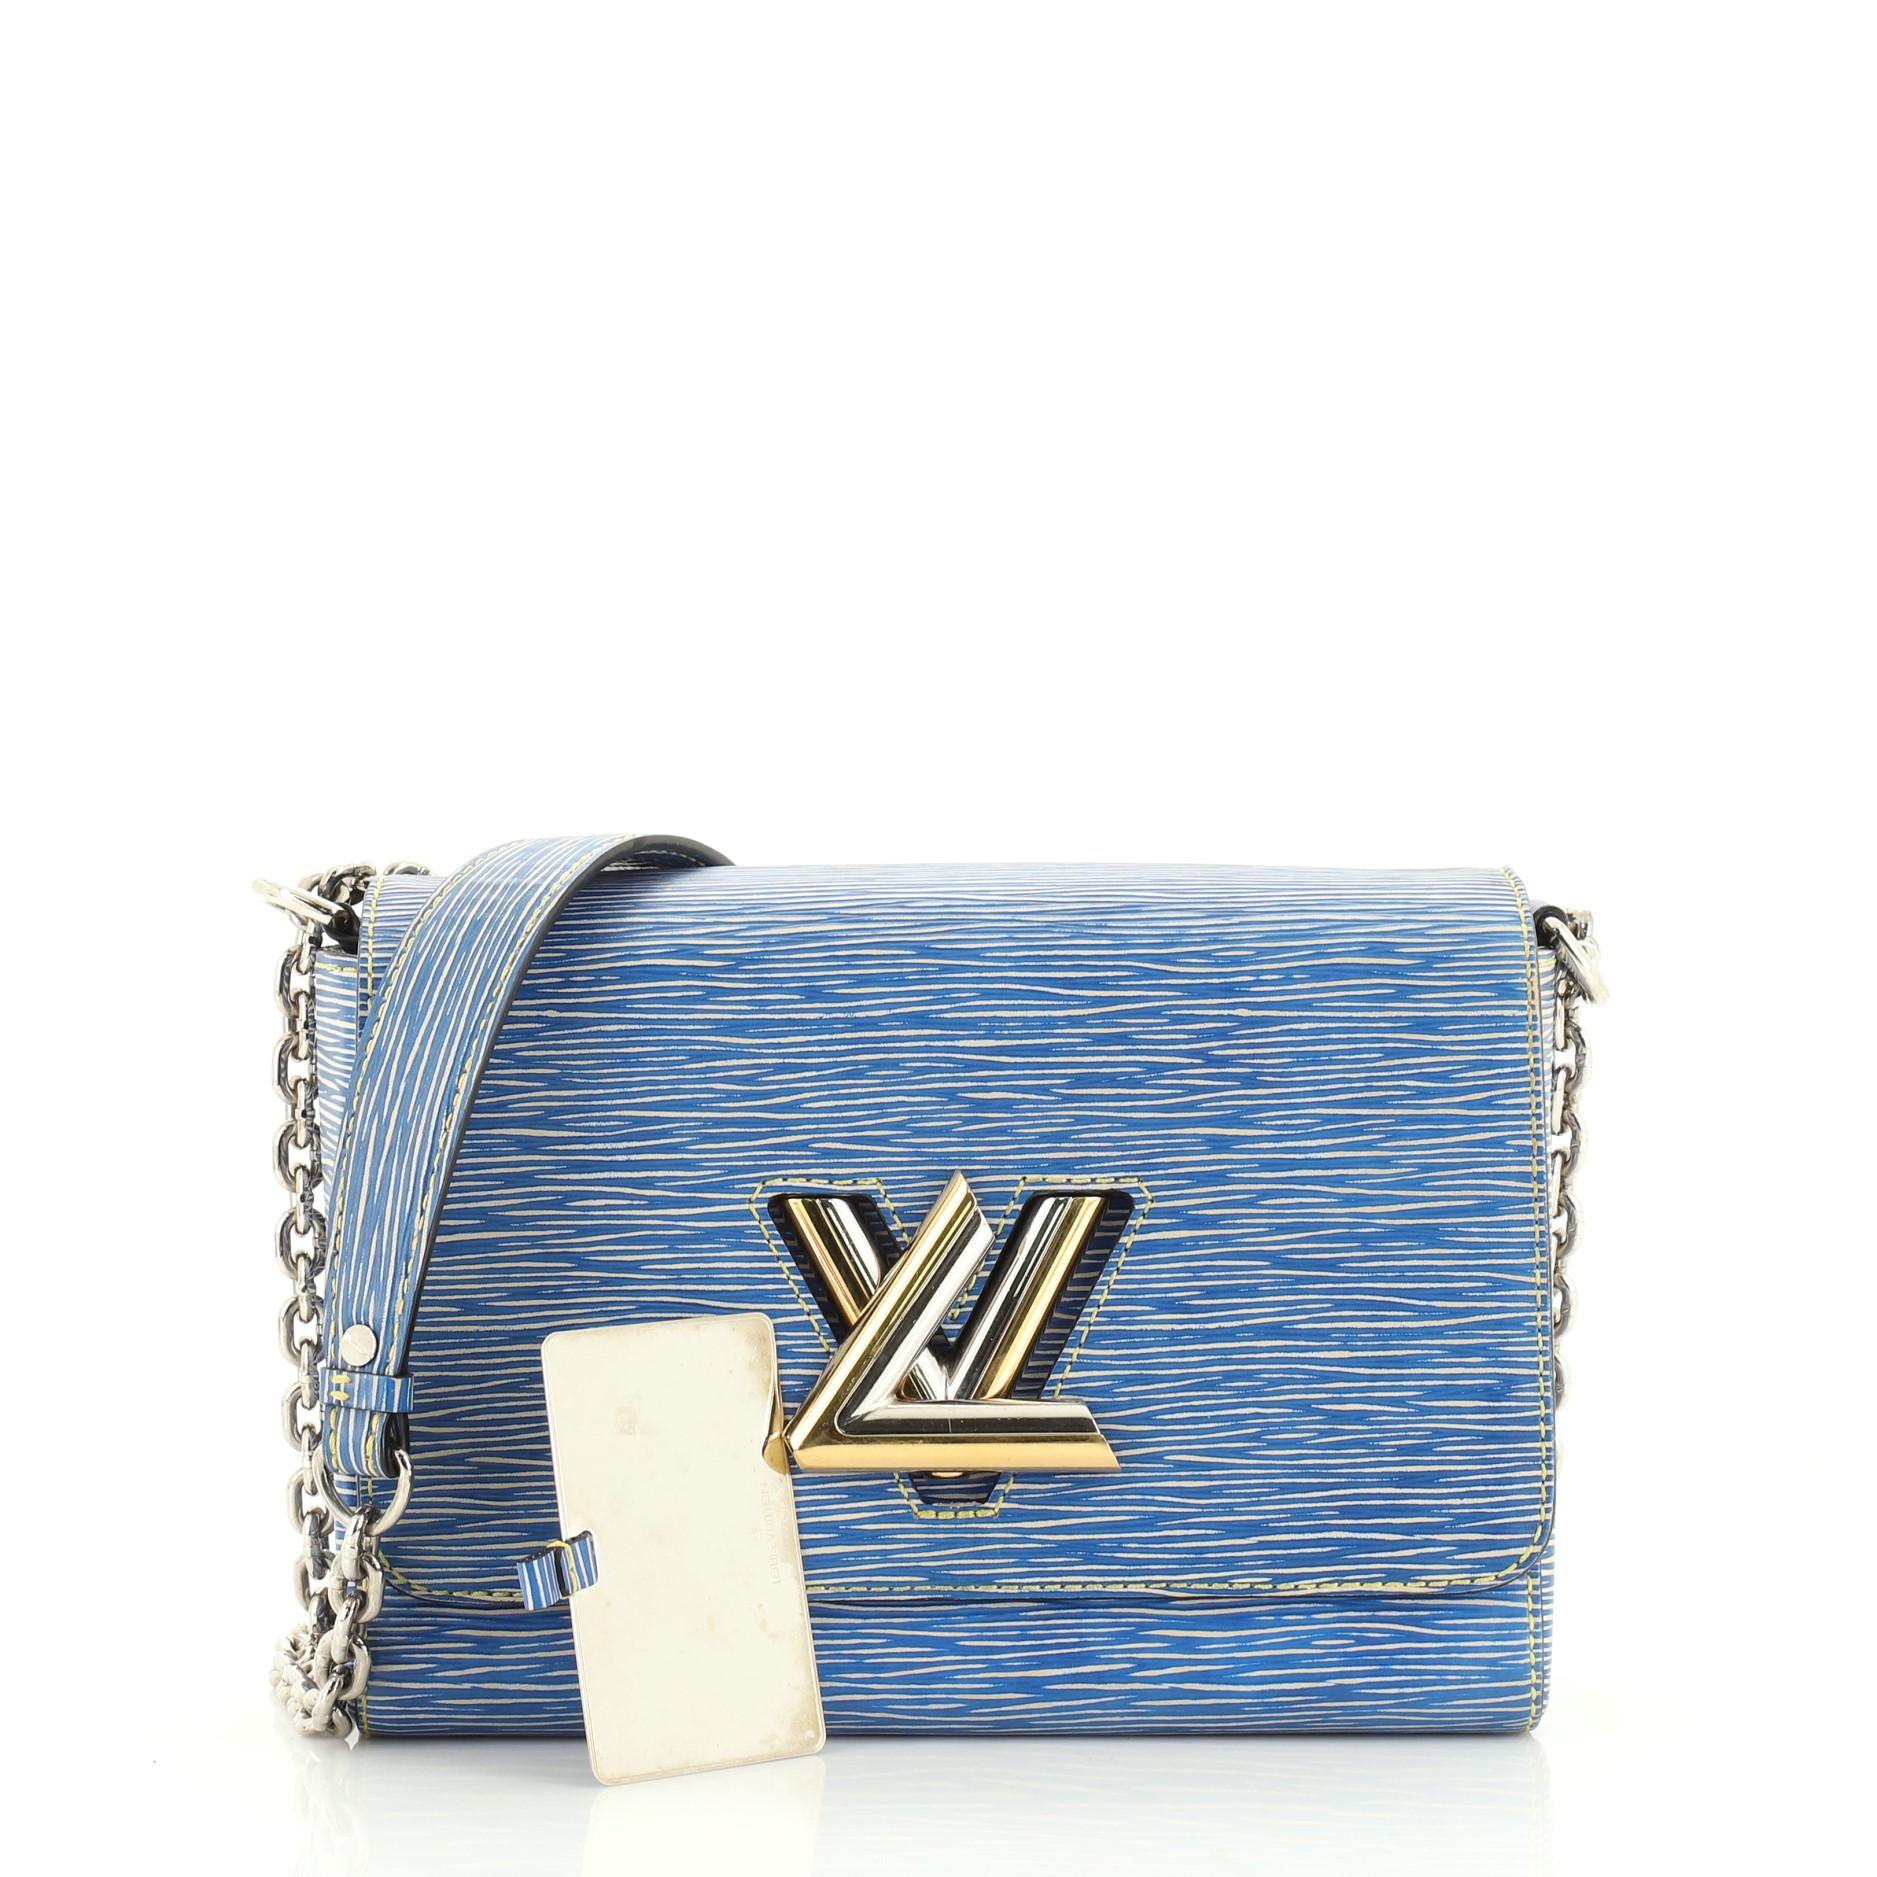 This Louis Vuitton Twist Handbag Epi Leather MM, crafted from blue epi leather, features chain link strap with leather pad, frontal flap, and gold and silver-tone hardware. Its LV twist lock closure opens to a neutral microfiber interior with slip